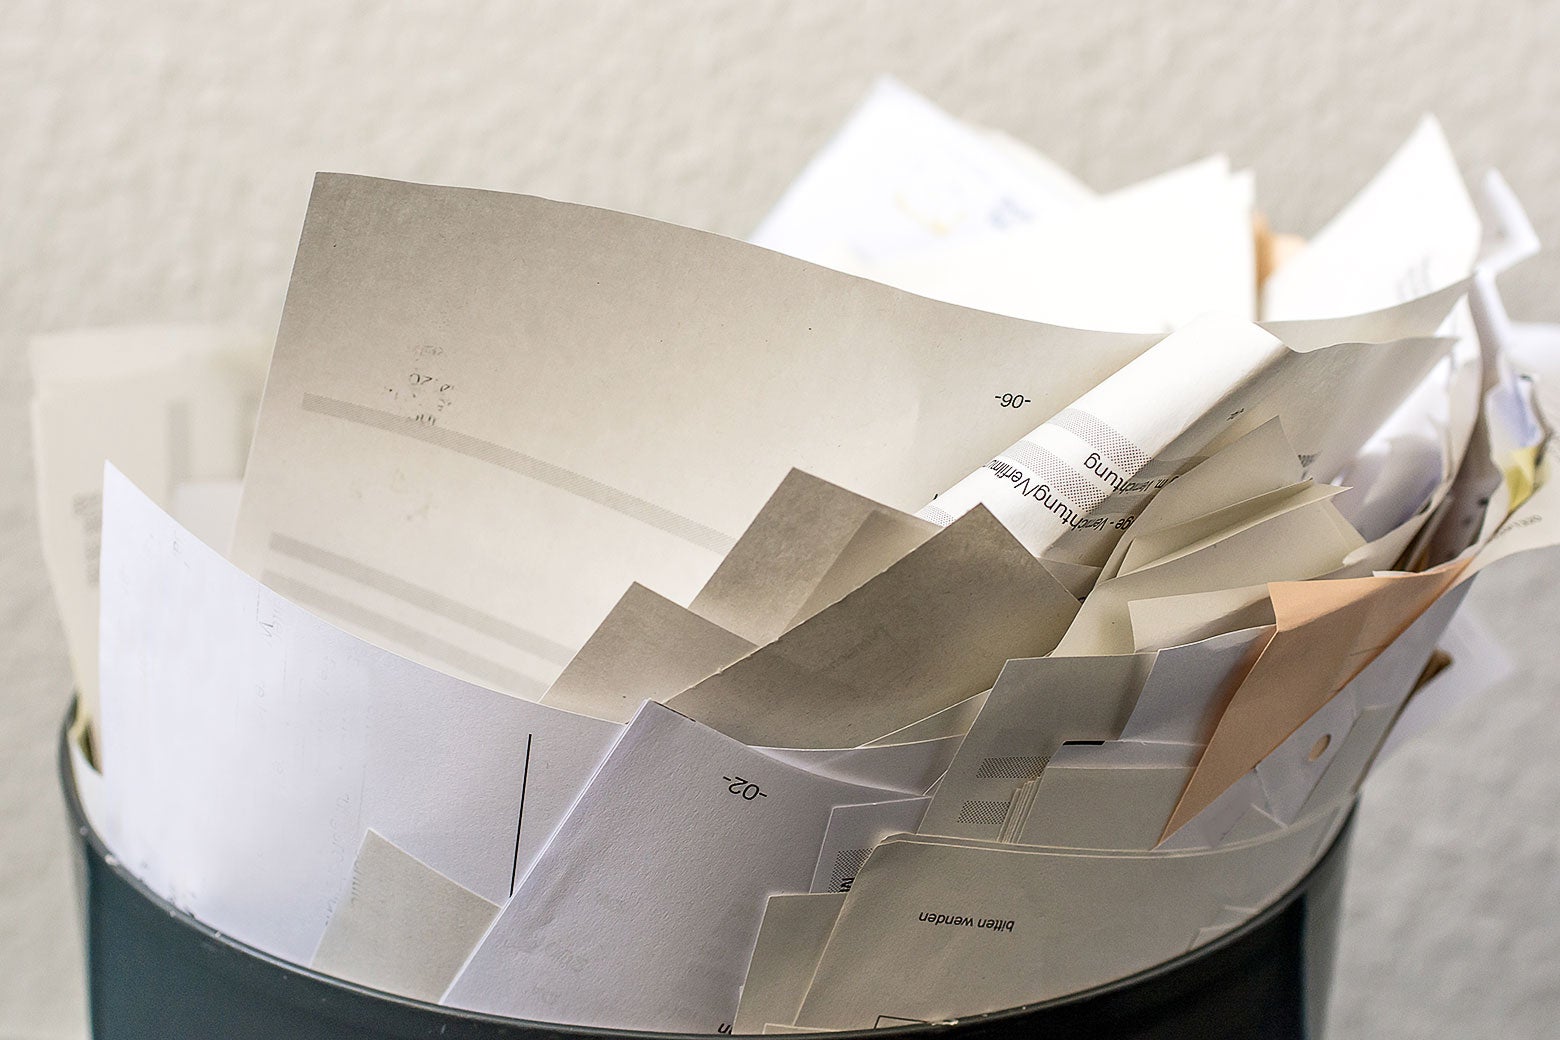 A wastebasket filled with miscellaneous papers.